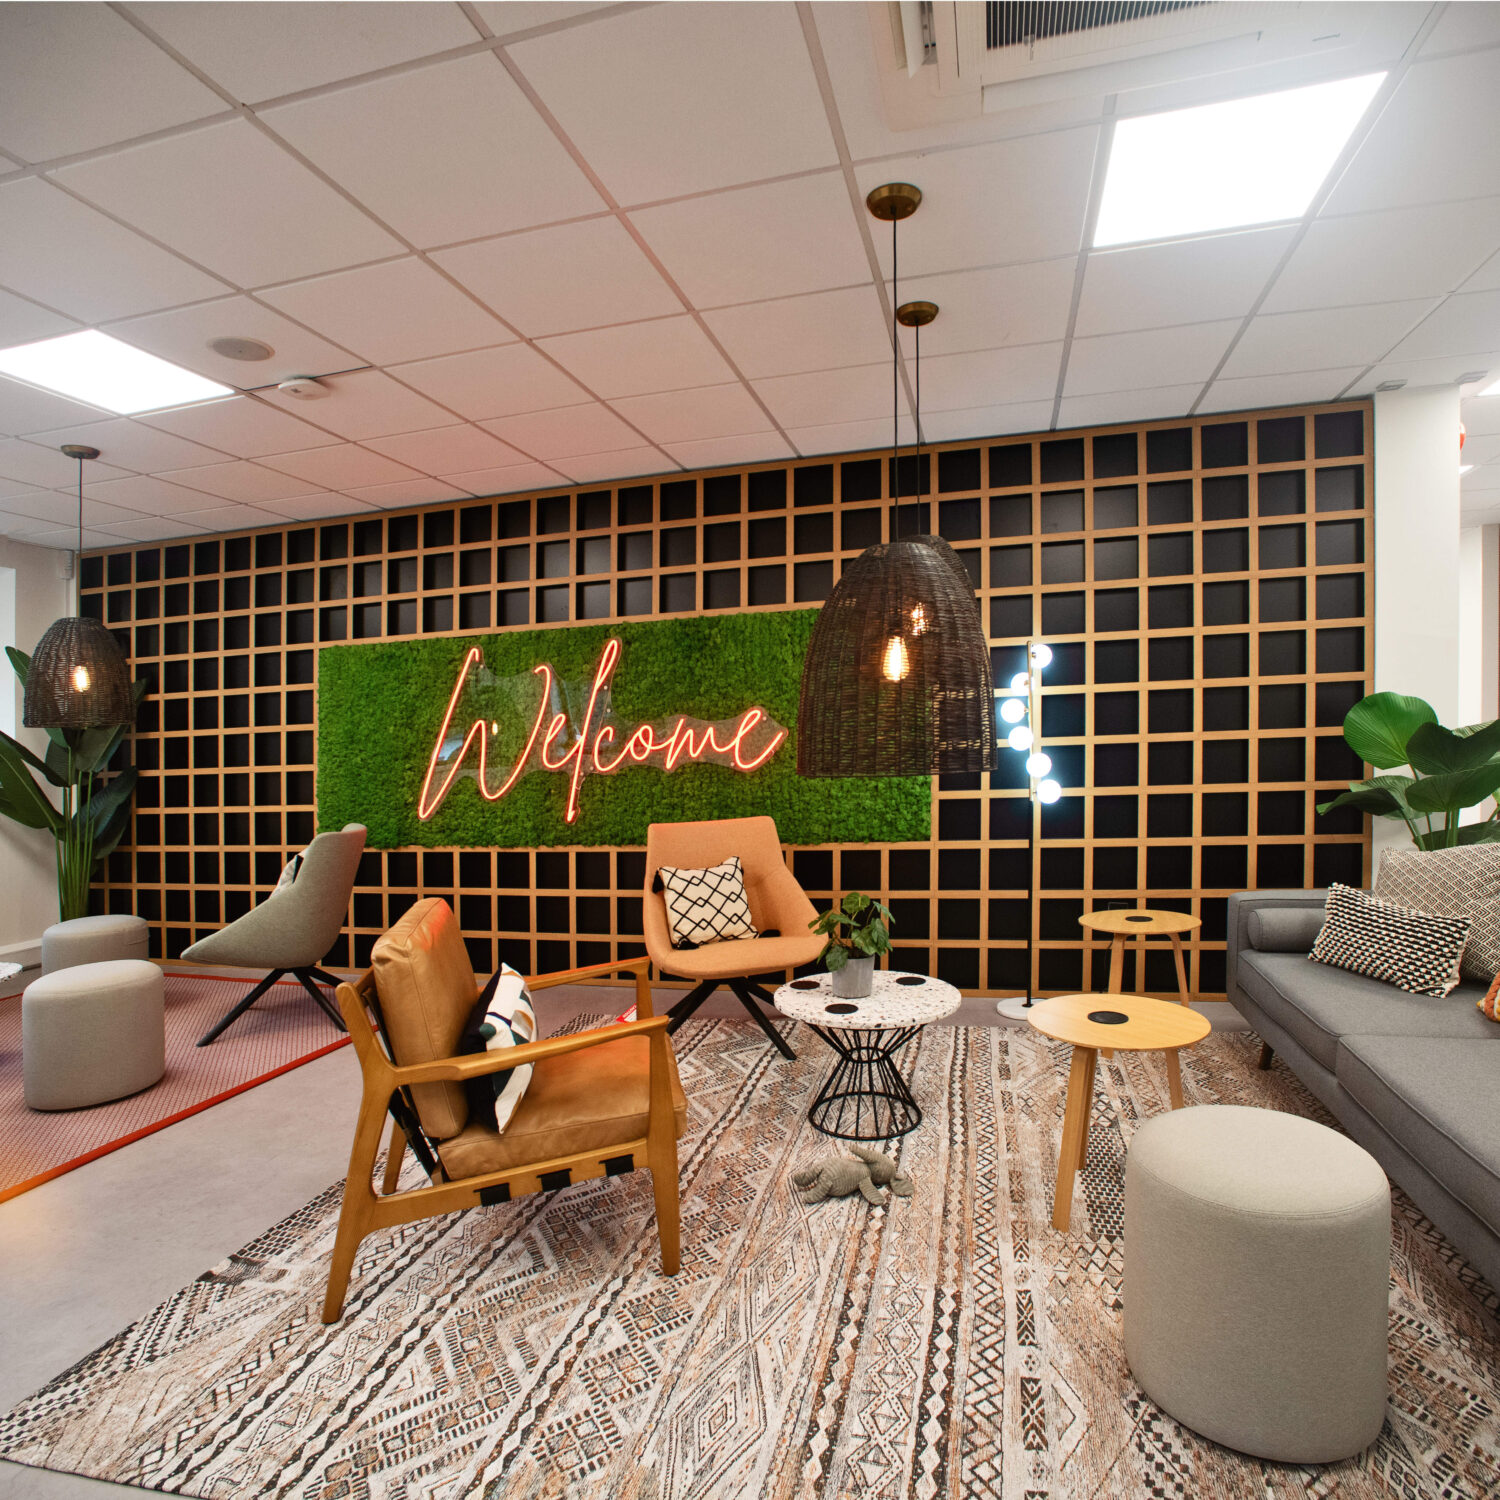 seating area with sofas and chairs by welcome sign on wall